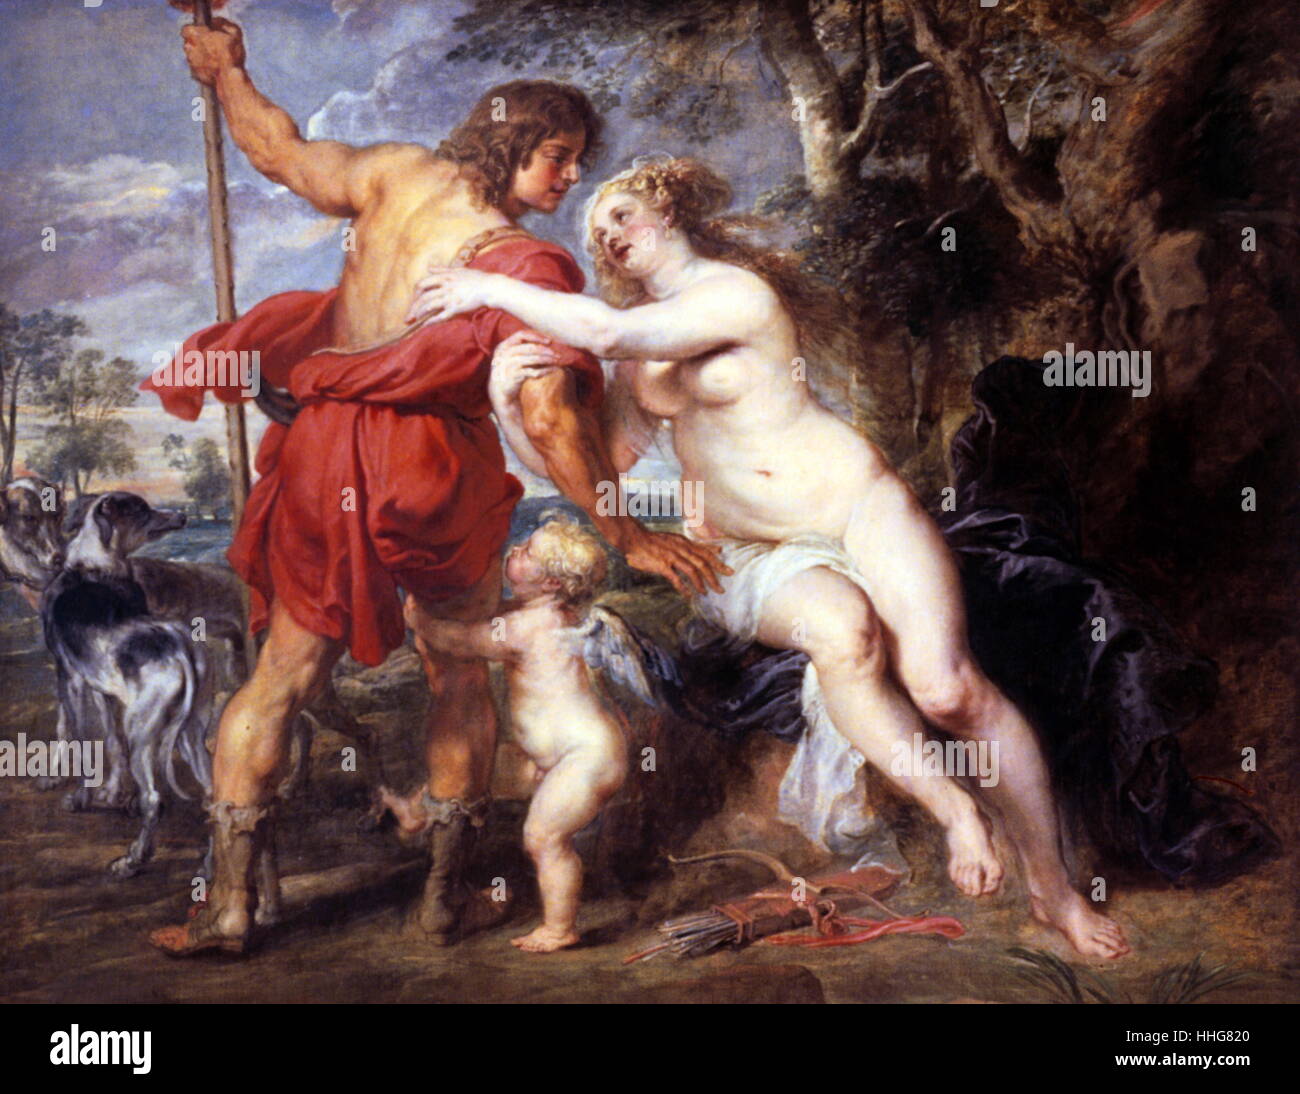 Venus and Adonis; mid-1630s; Oil on canvas, (Cincinnati Art Museum). By Peter Paul Rubens (1577 - 1640). Based upon Ovid’s story, Metamorphoses (8 A. D). Pricked by one of Cupid’s arrows, Venus falls in love with Adonis the hunter. Rubens was born in Siegen in Germany, but from the age of 10 he lived and went to school in Antwerp, Belgium, where he became an important Flemish Artist. Stock Photo